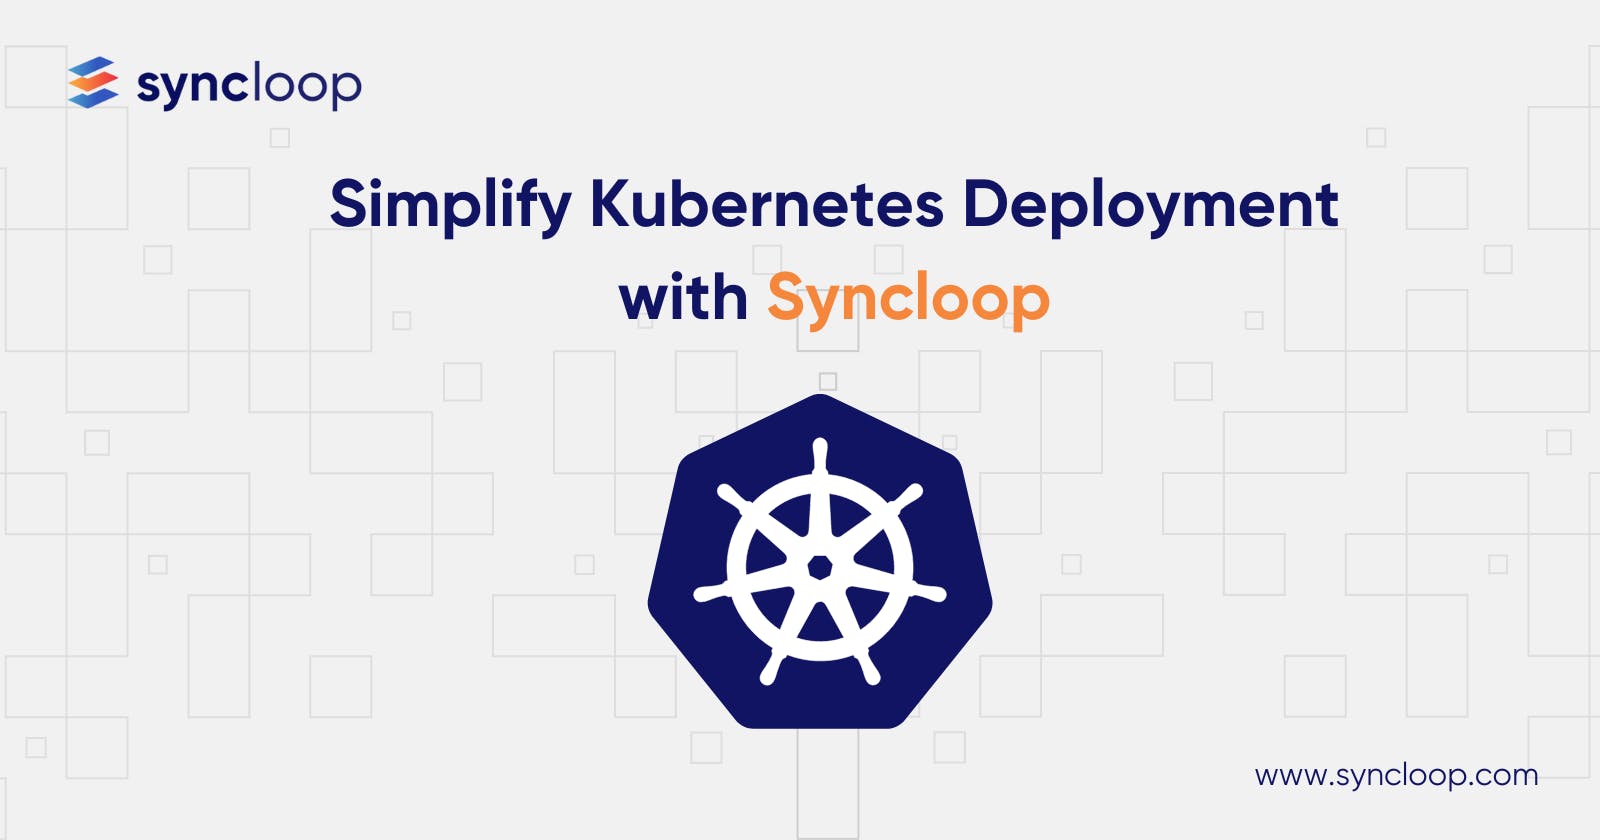 Simplify Kubernetes Deployment with Syncloop